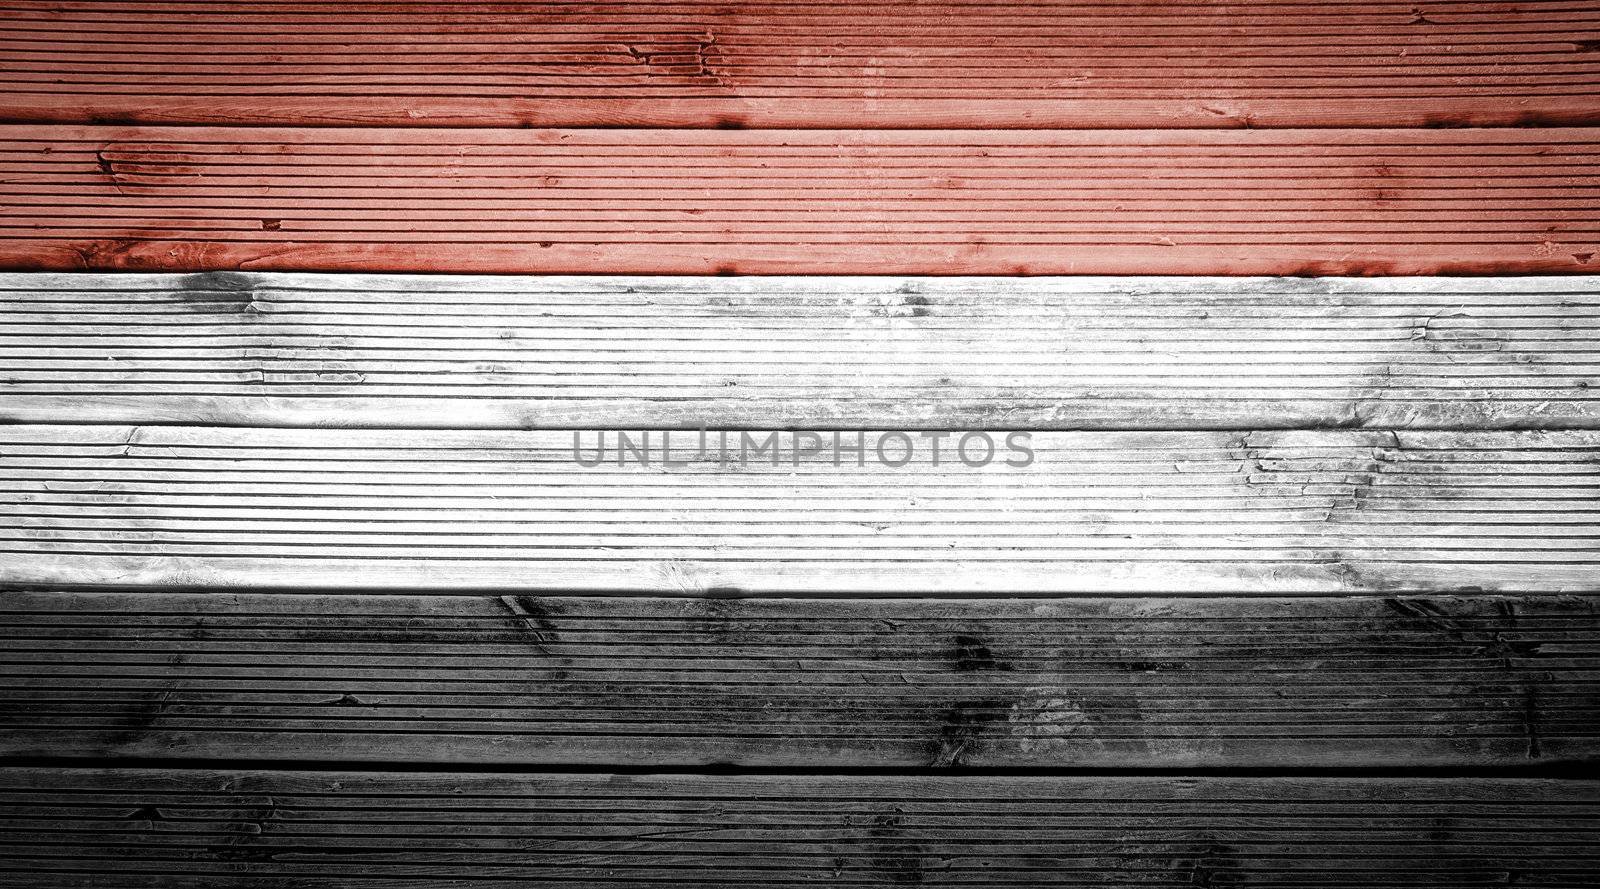 Natural wood planks texture background with the colors of the flag of Egypt